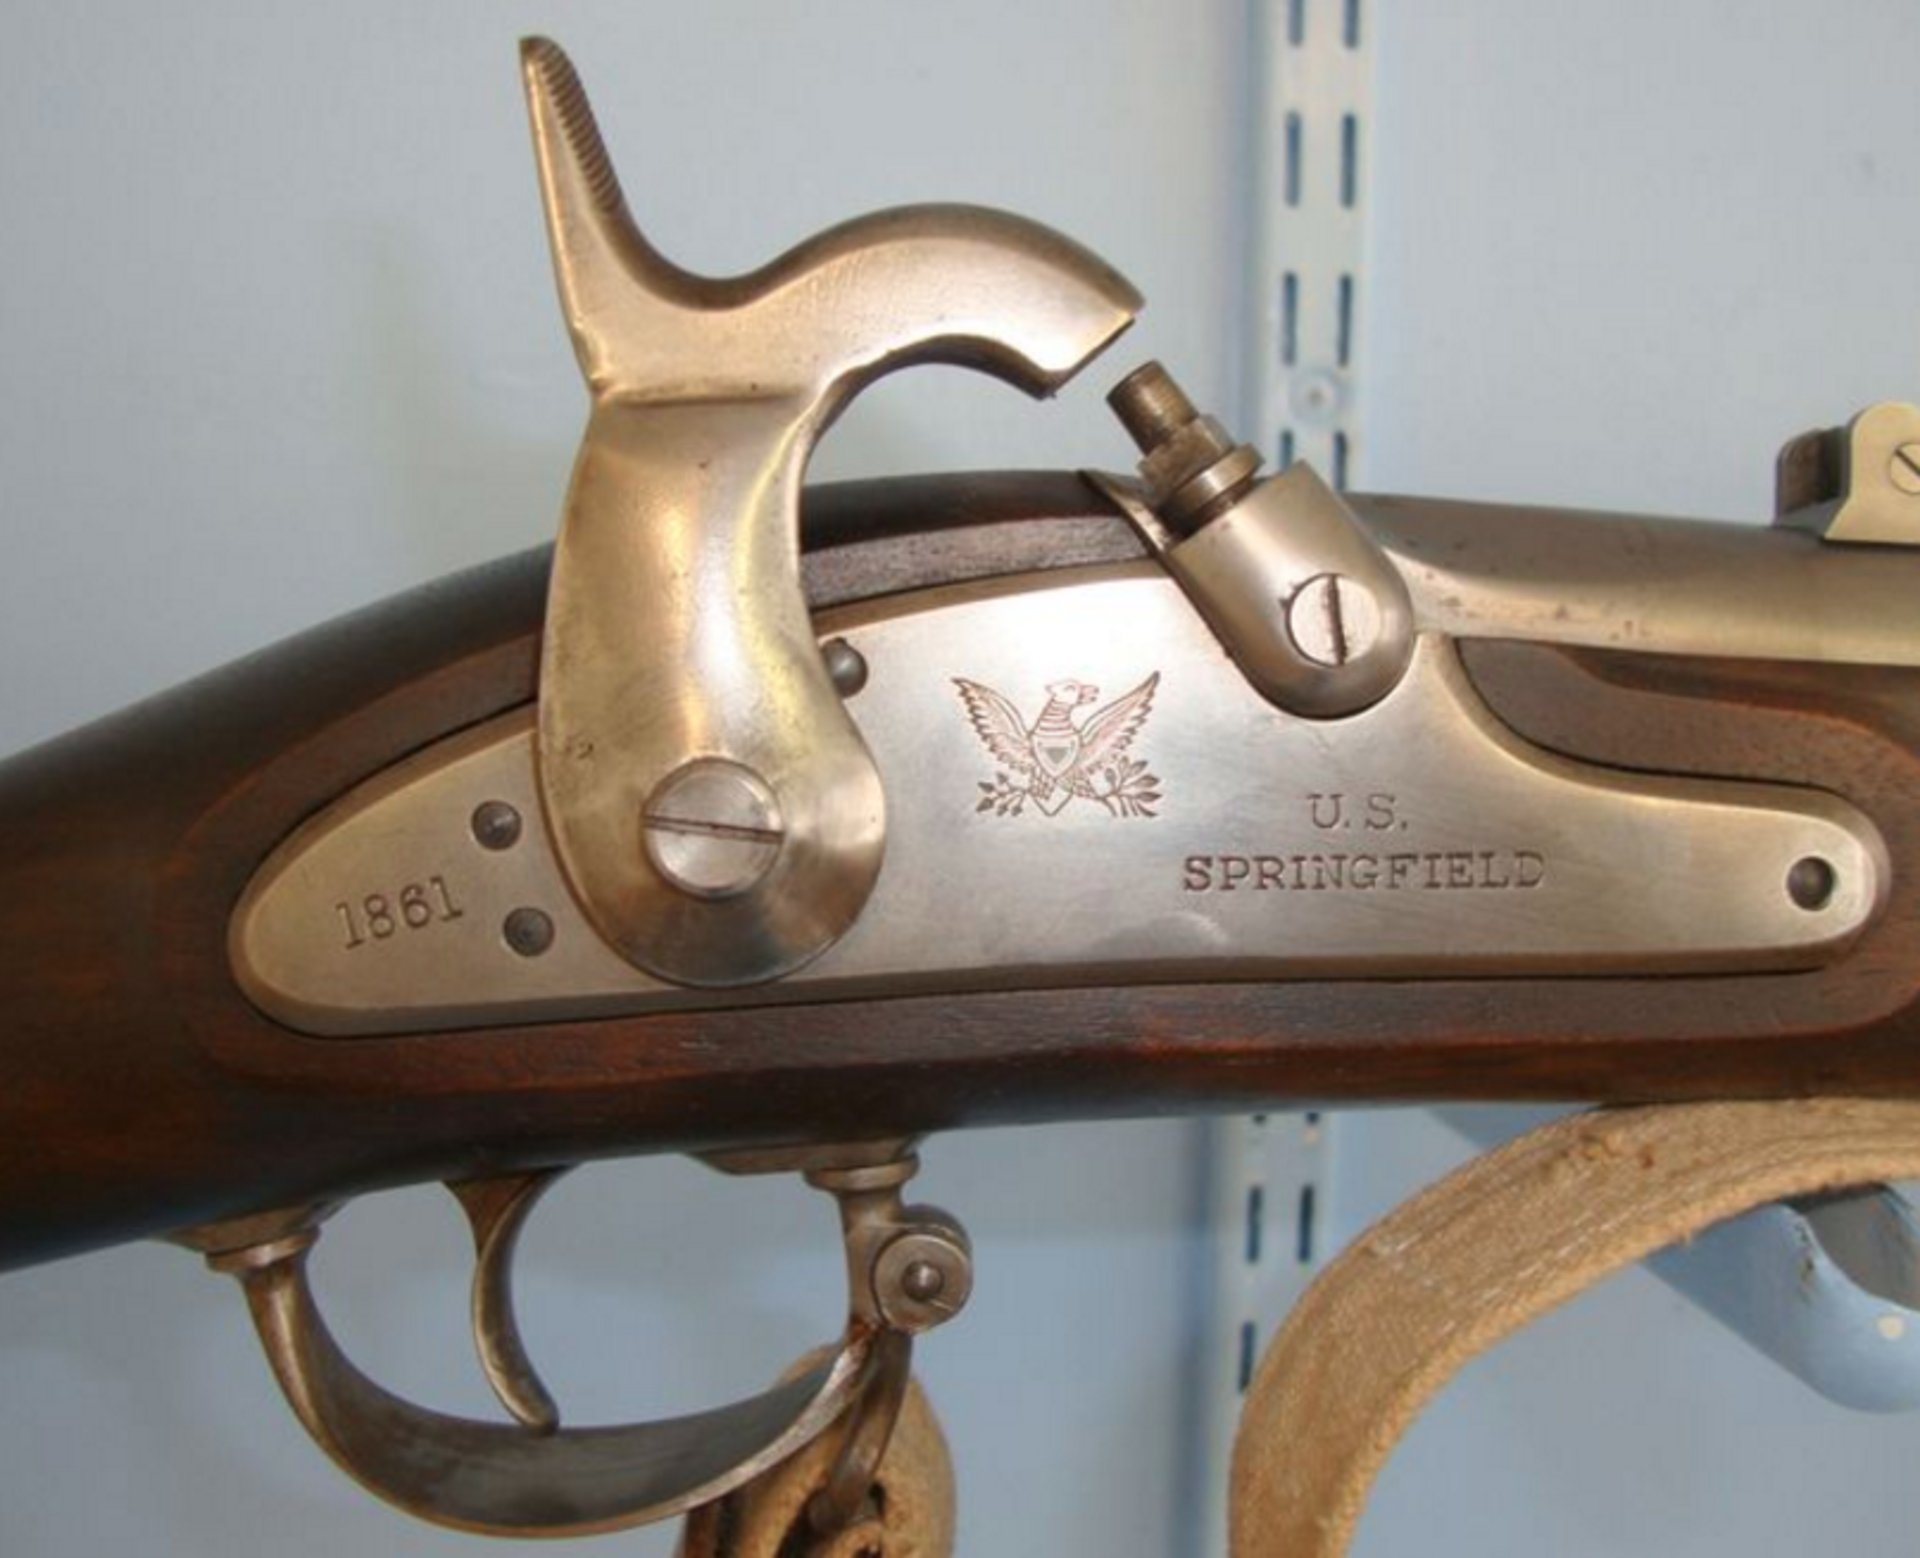 MINT, Springfield Model Of 1861 Percussion Rifle By Euro Arms Of America & Sling - Image 2 of 3